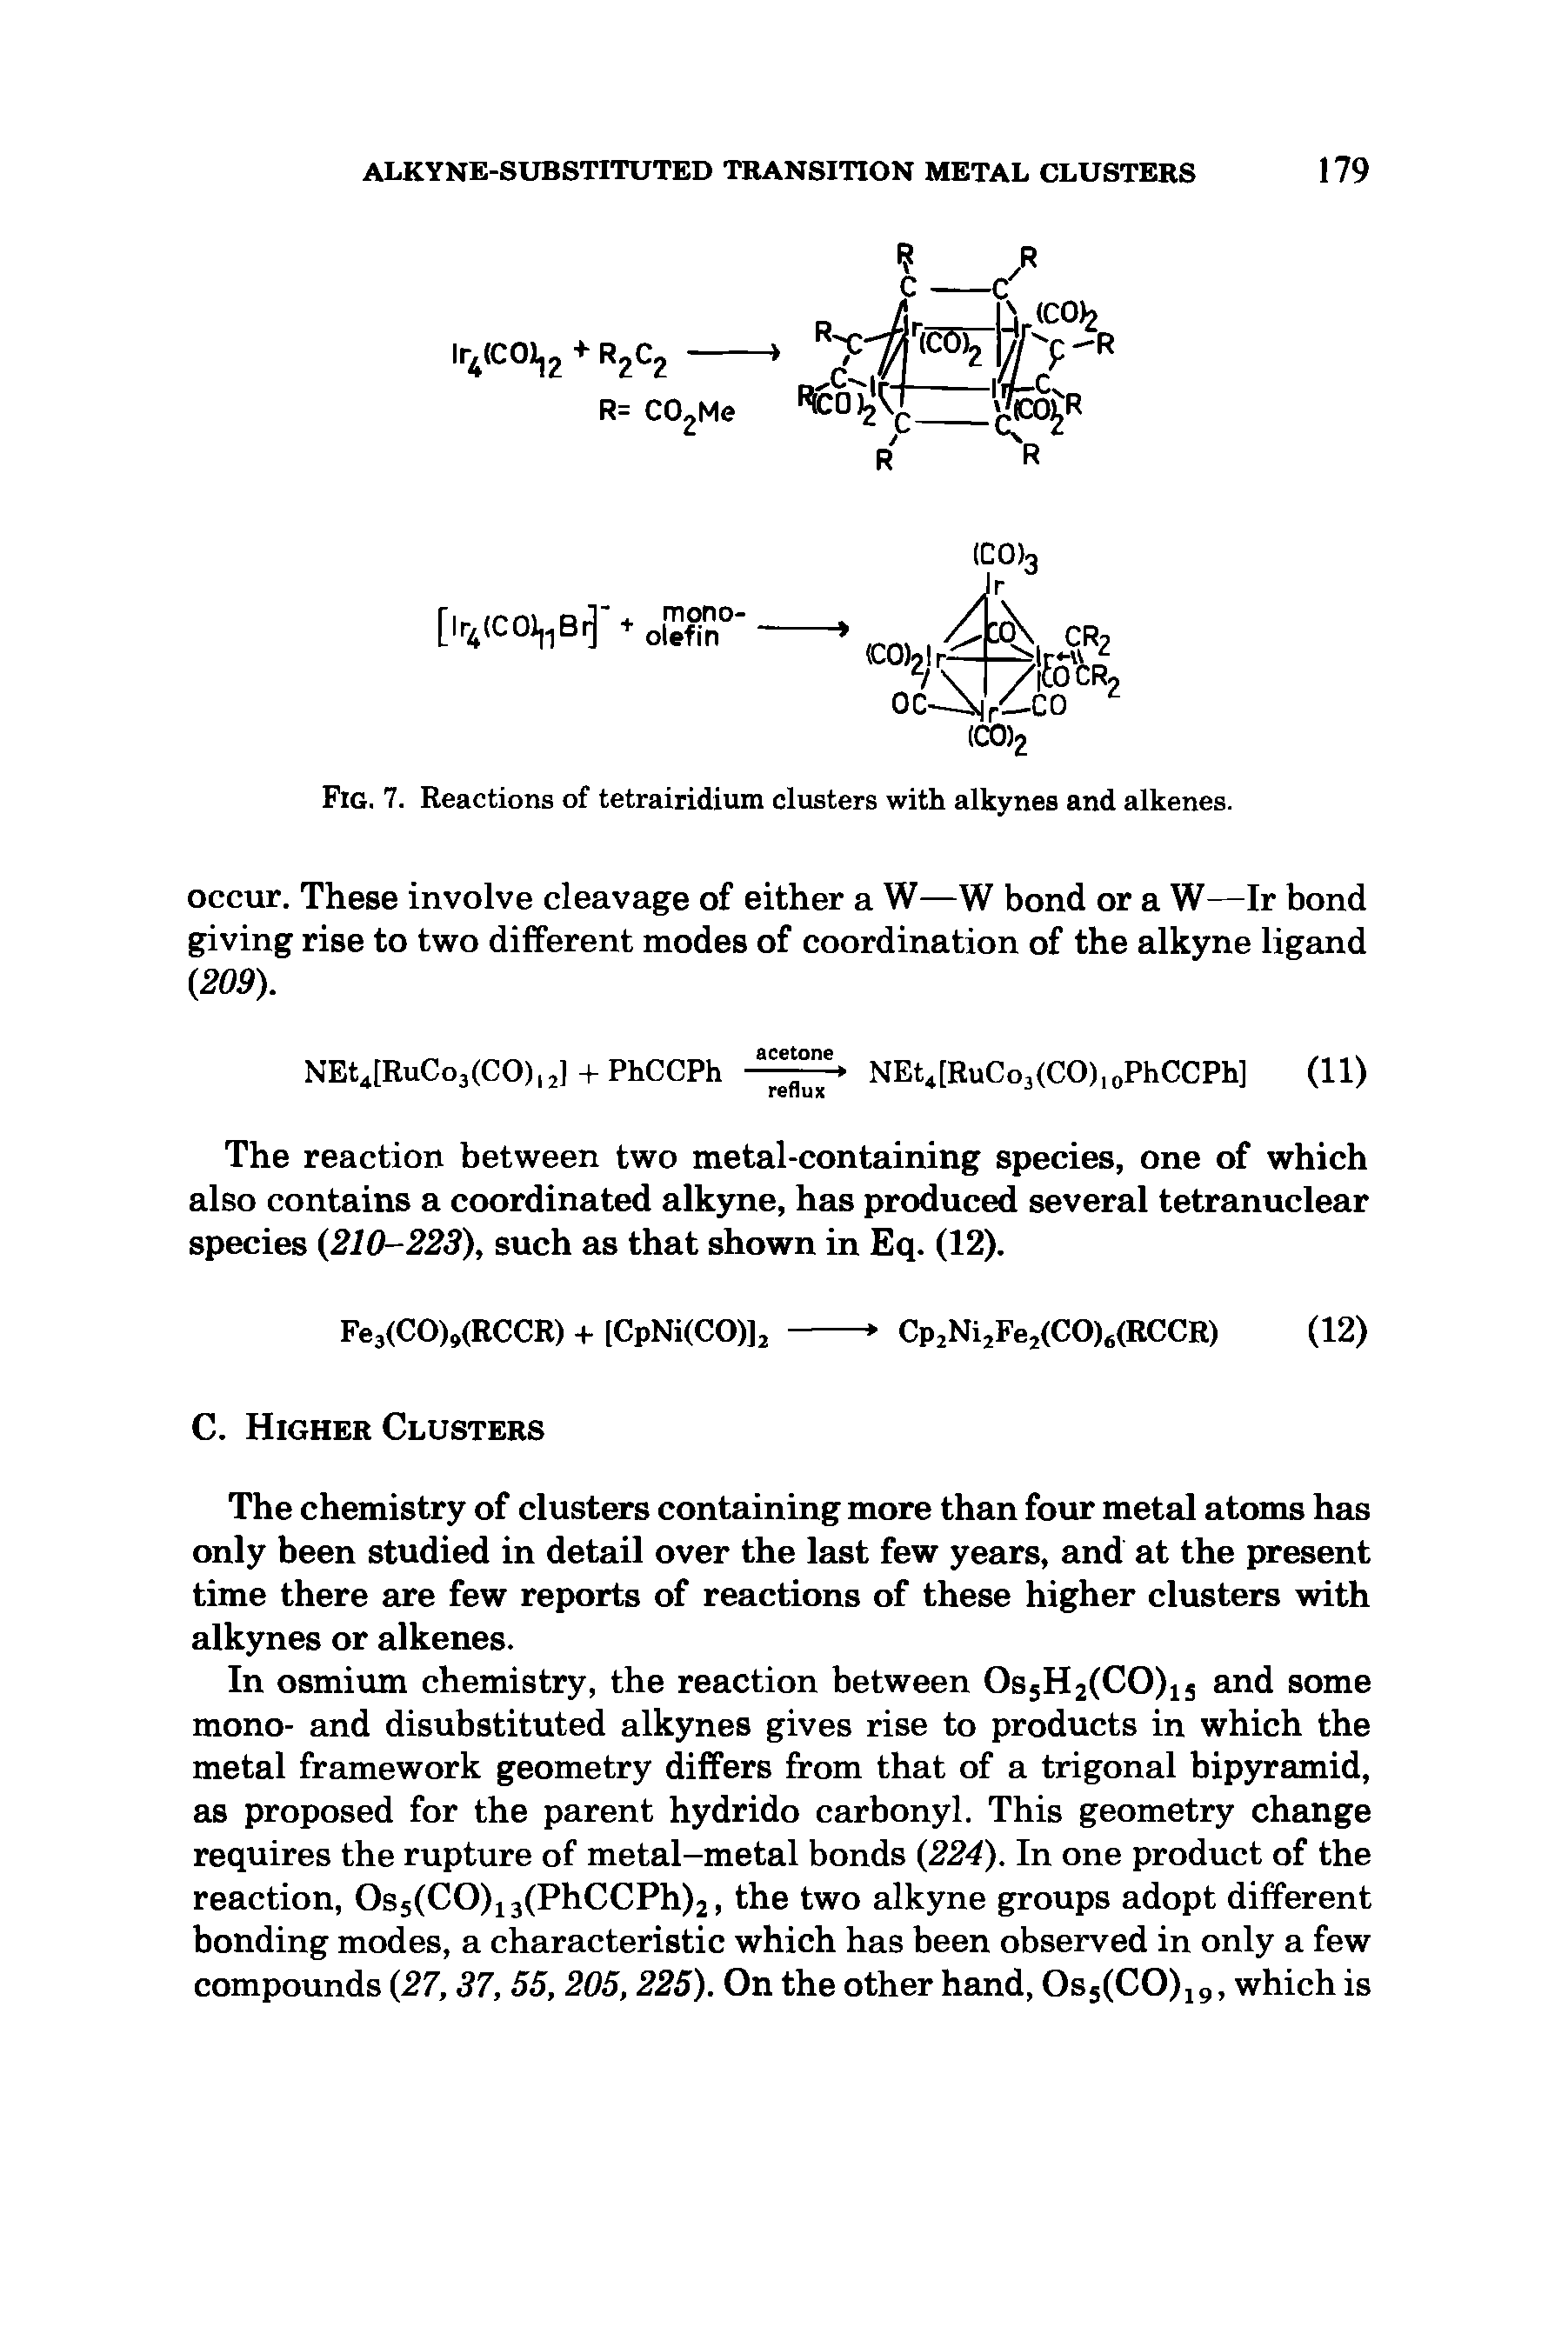 Fig. 7. Reactions of tetrairidium clusters with alkynes and alkenes.